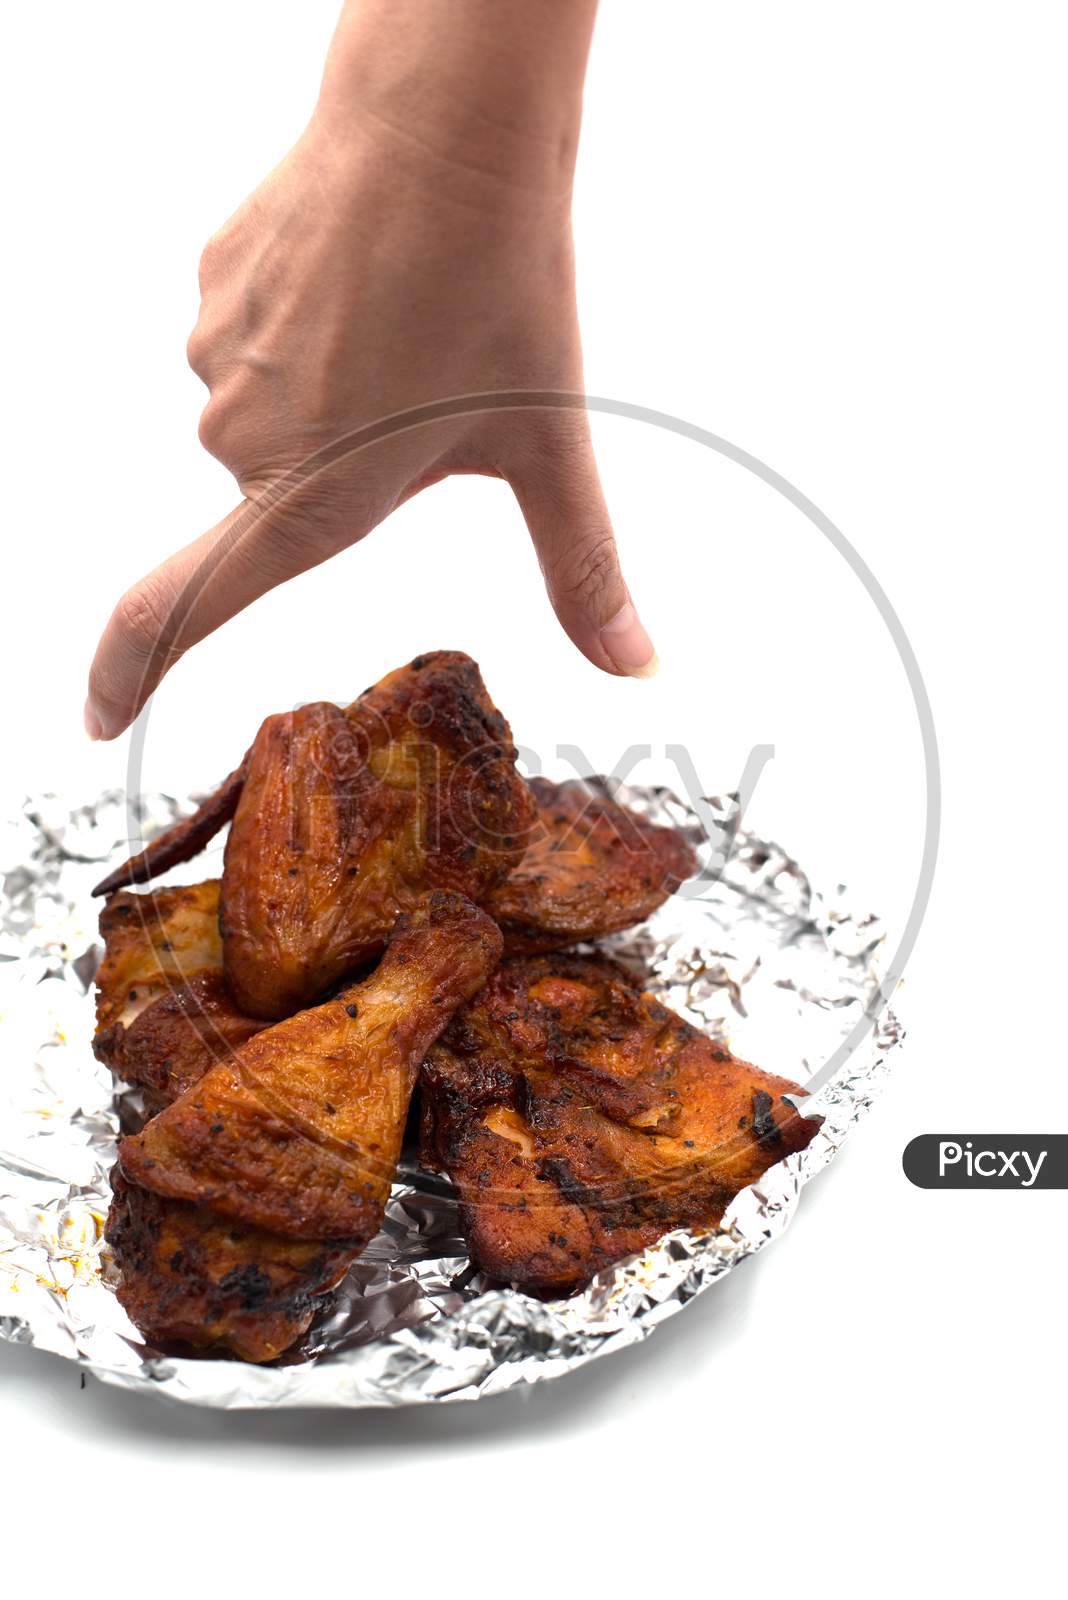 Hand Catching Roasted Wing. Delicious Grill Chicken On Foil On Isolated White Background. Food And Appetizer Concept